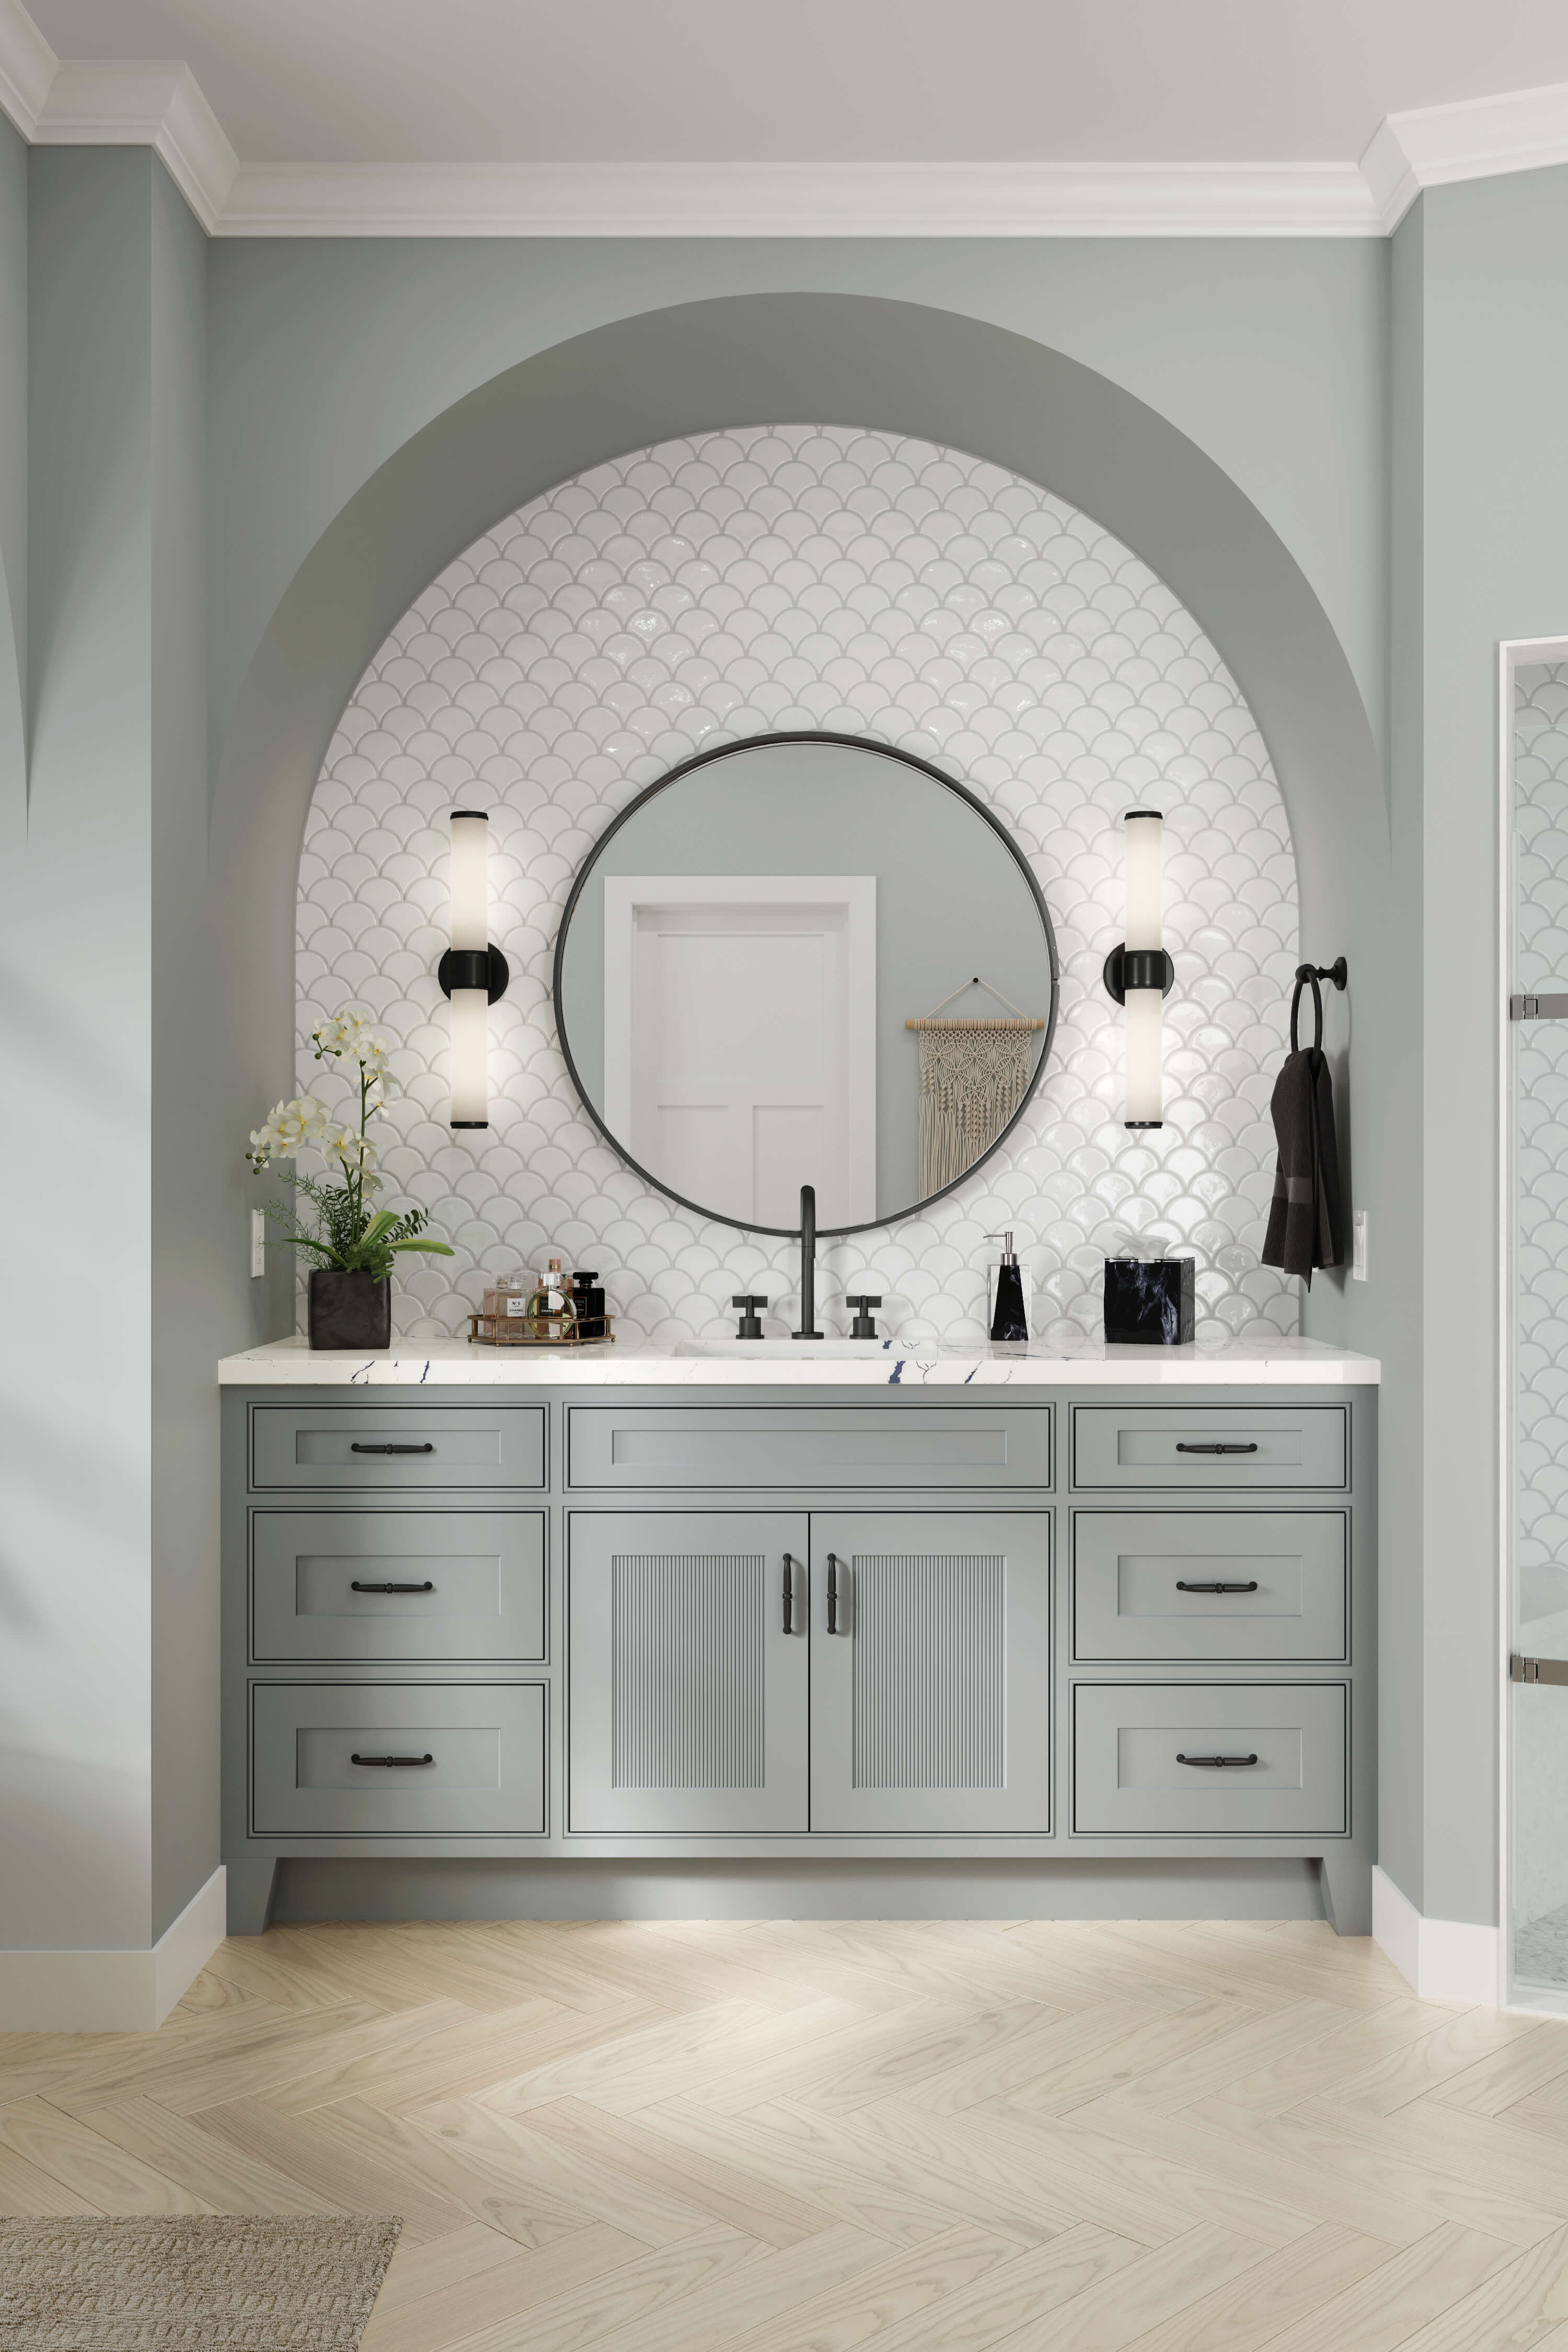 A beautiful bathroom with an arched wall and sunk-in vanity with reeded panel cabinet doors.